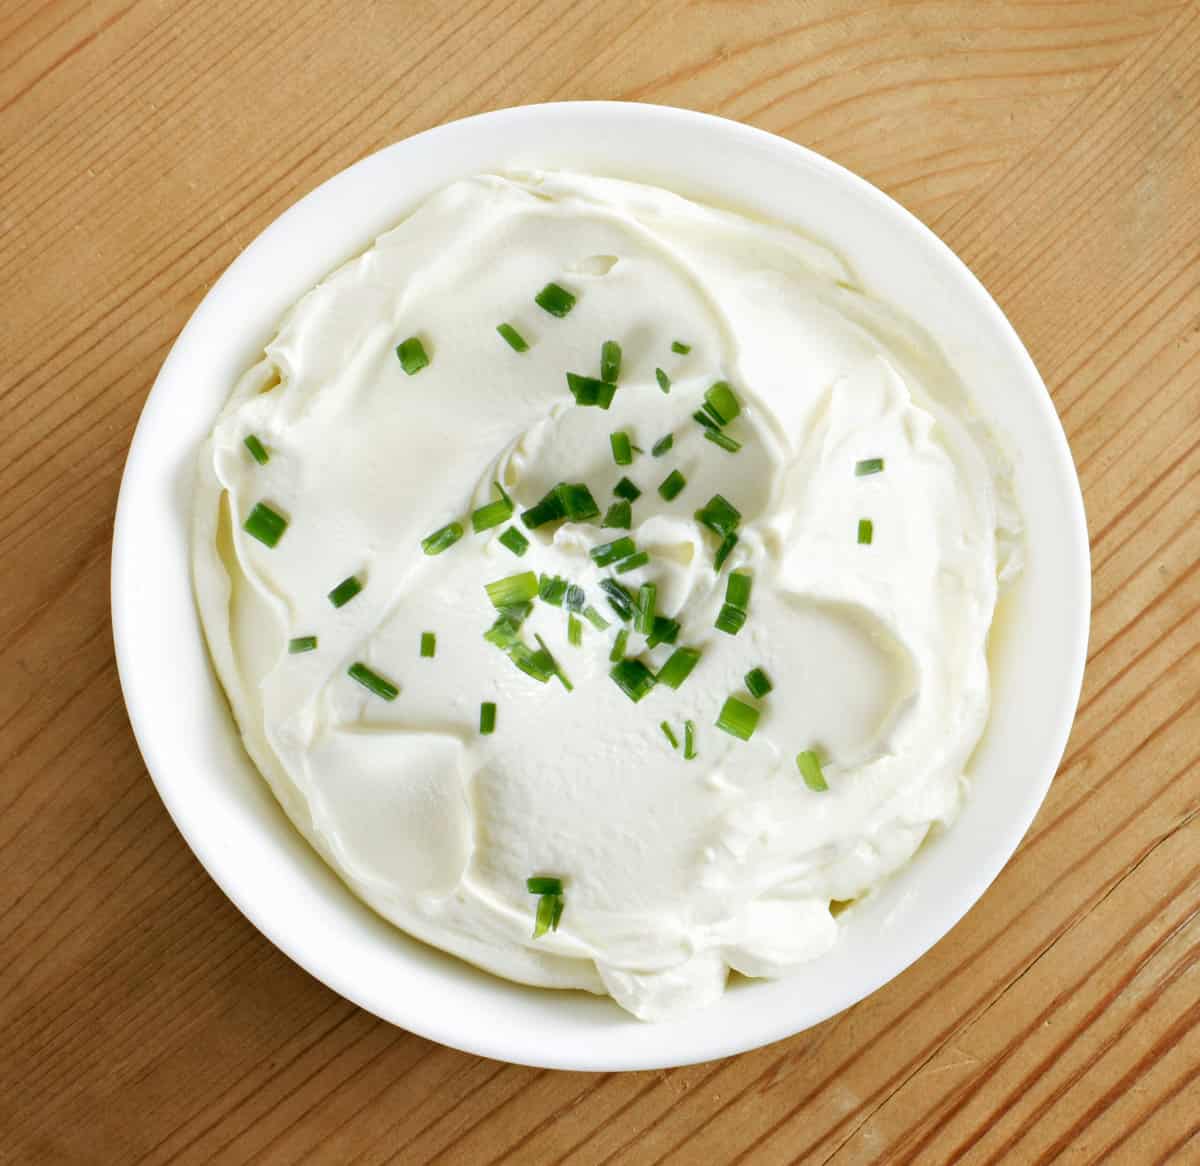 A bowl of homemade sour cream topped with chives.